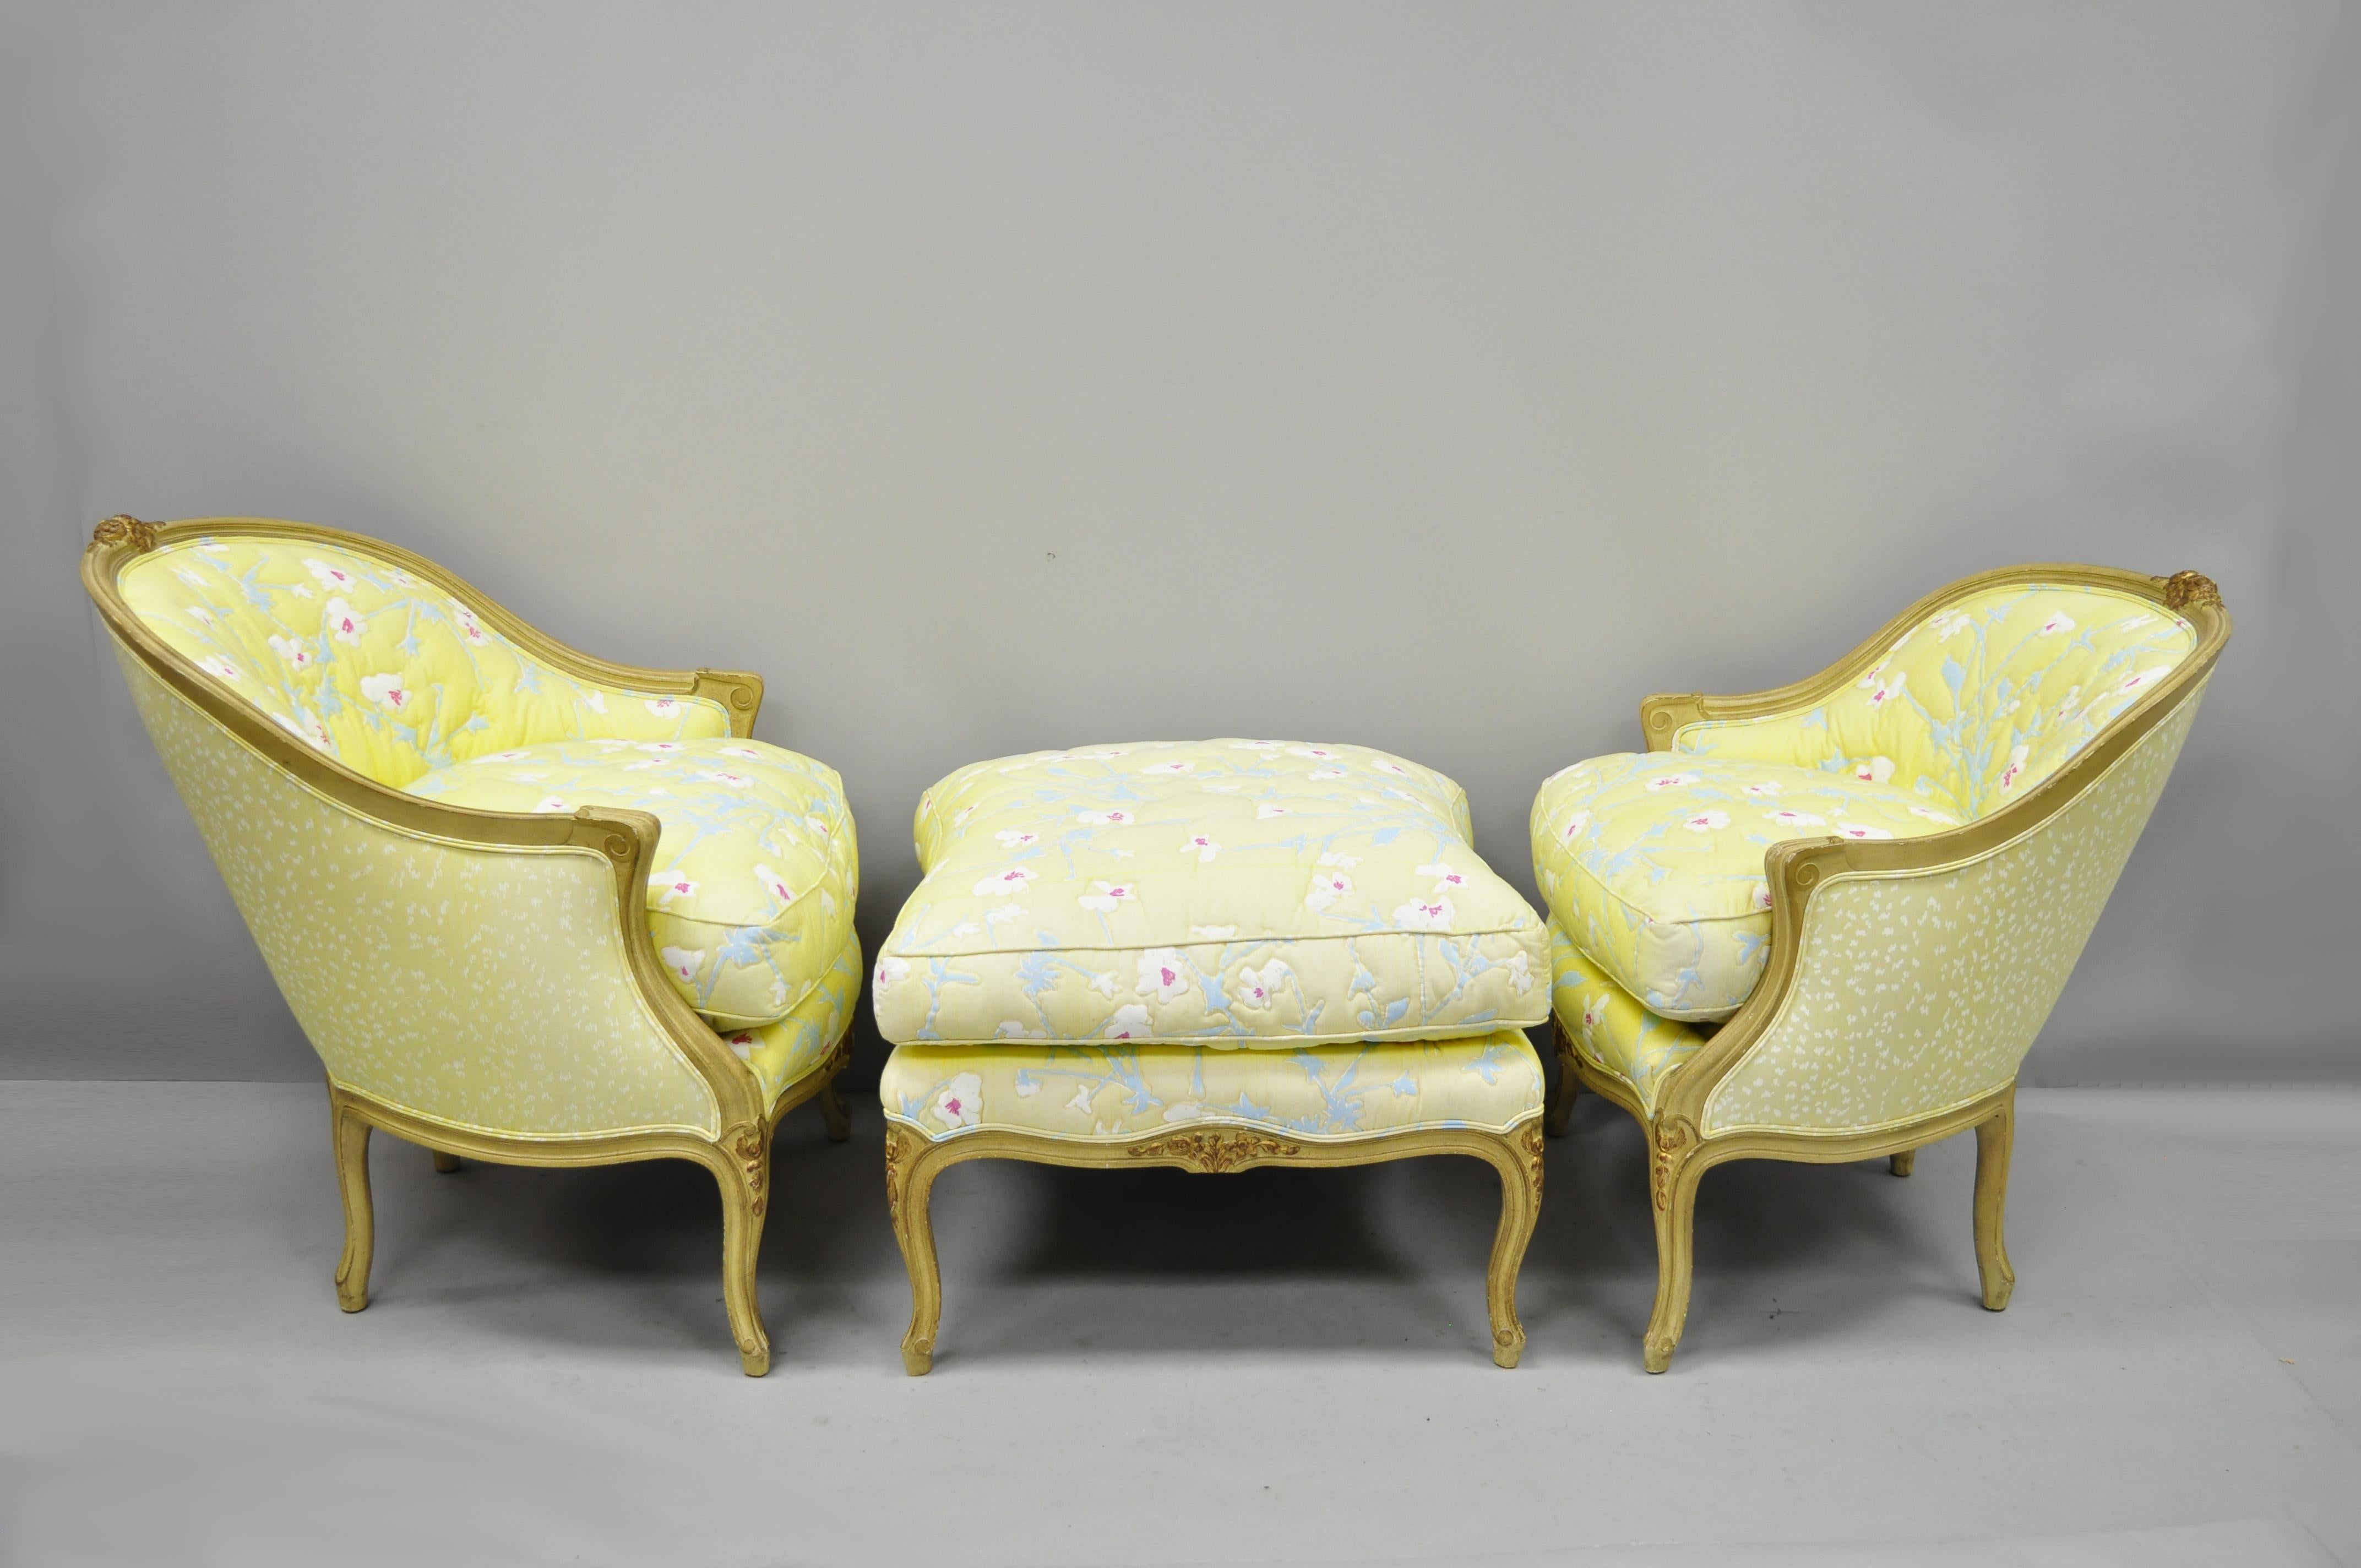 French Louis XV style Duchesse Brisee chaise pair of bergere chairs and ottoman. Listing includes 3-piece set consisting of His & Her Bergere chairs and ottoman, cream and gold painted finish, yellow and blue floral upholstery, solid wood frames,